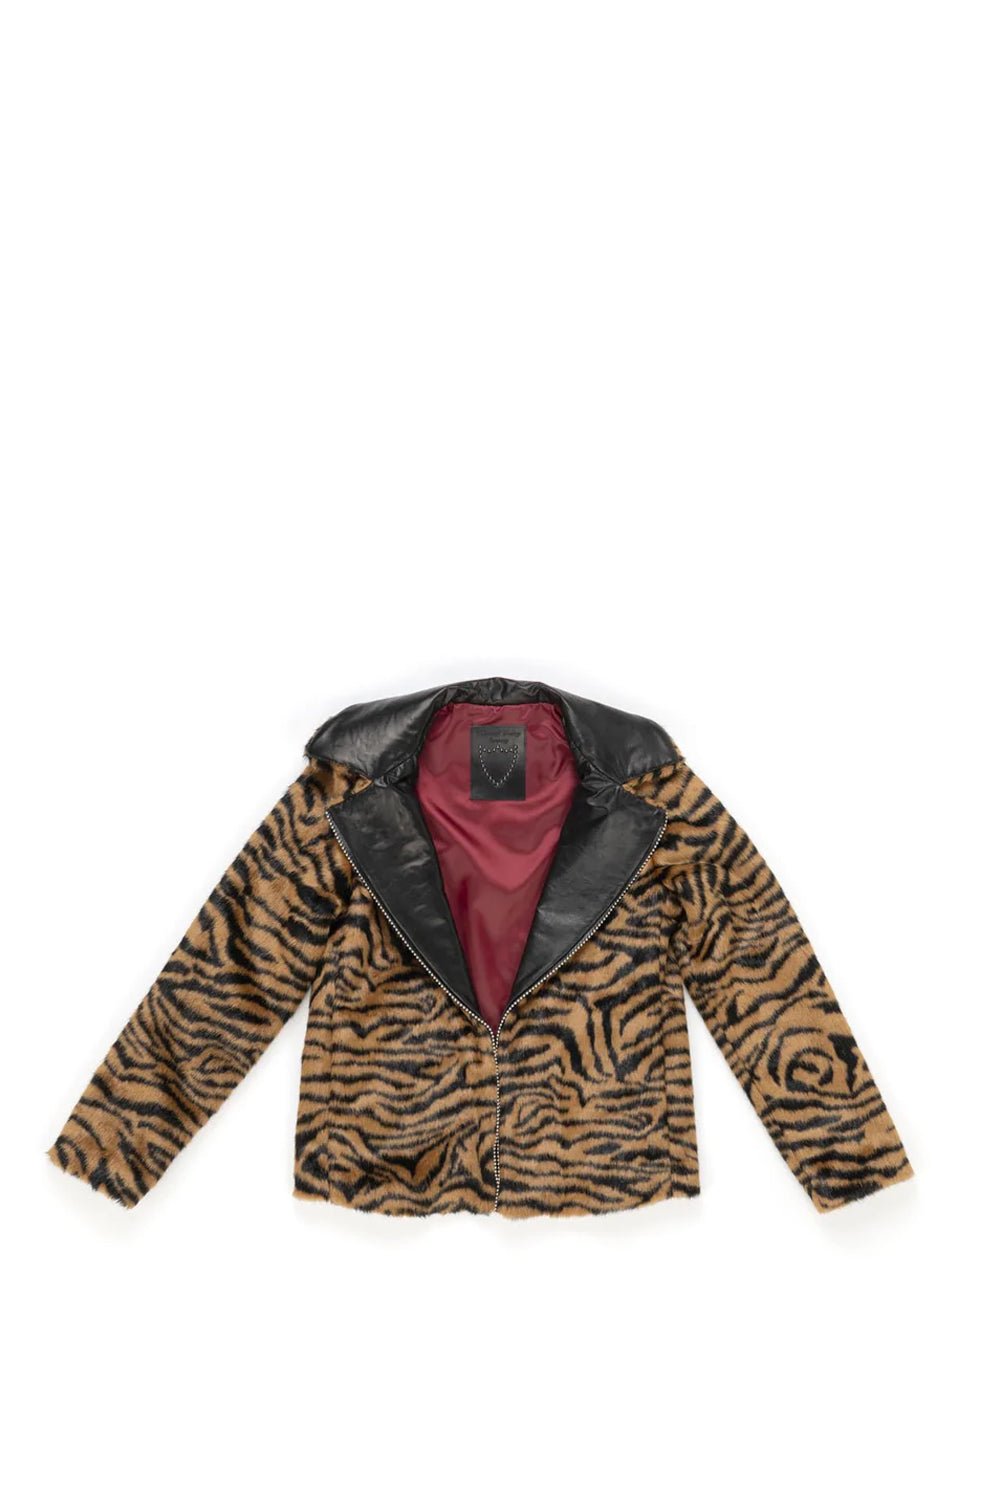 TIGER FAUX FUR BLAZER Tiger faux fur bazer, leather collar with hand-studded edge. Contrasting red lining. HTC LOS ANGELES